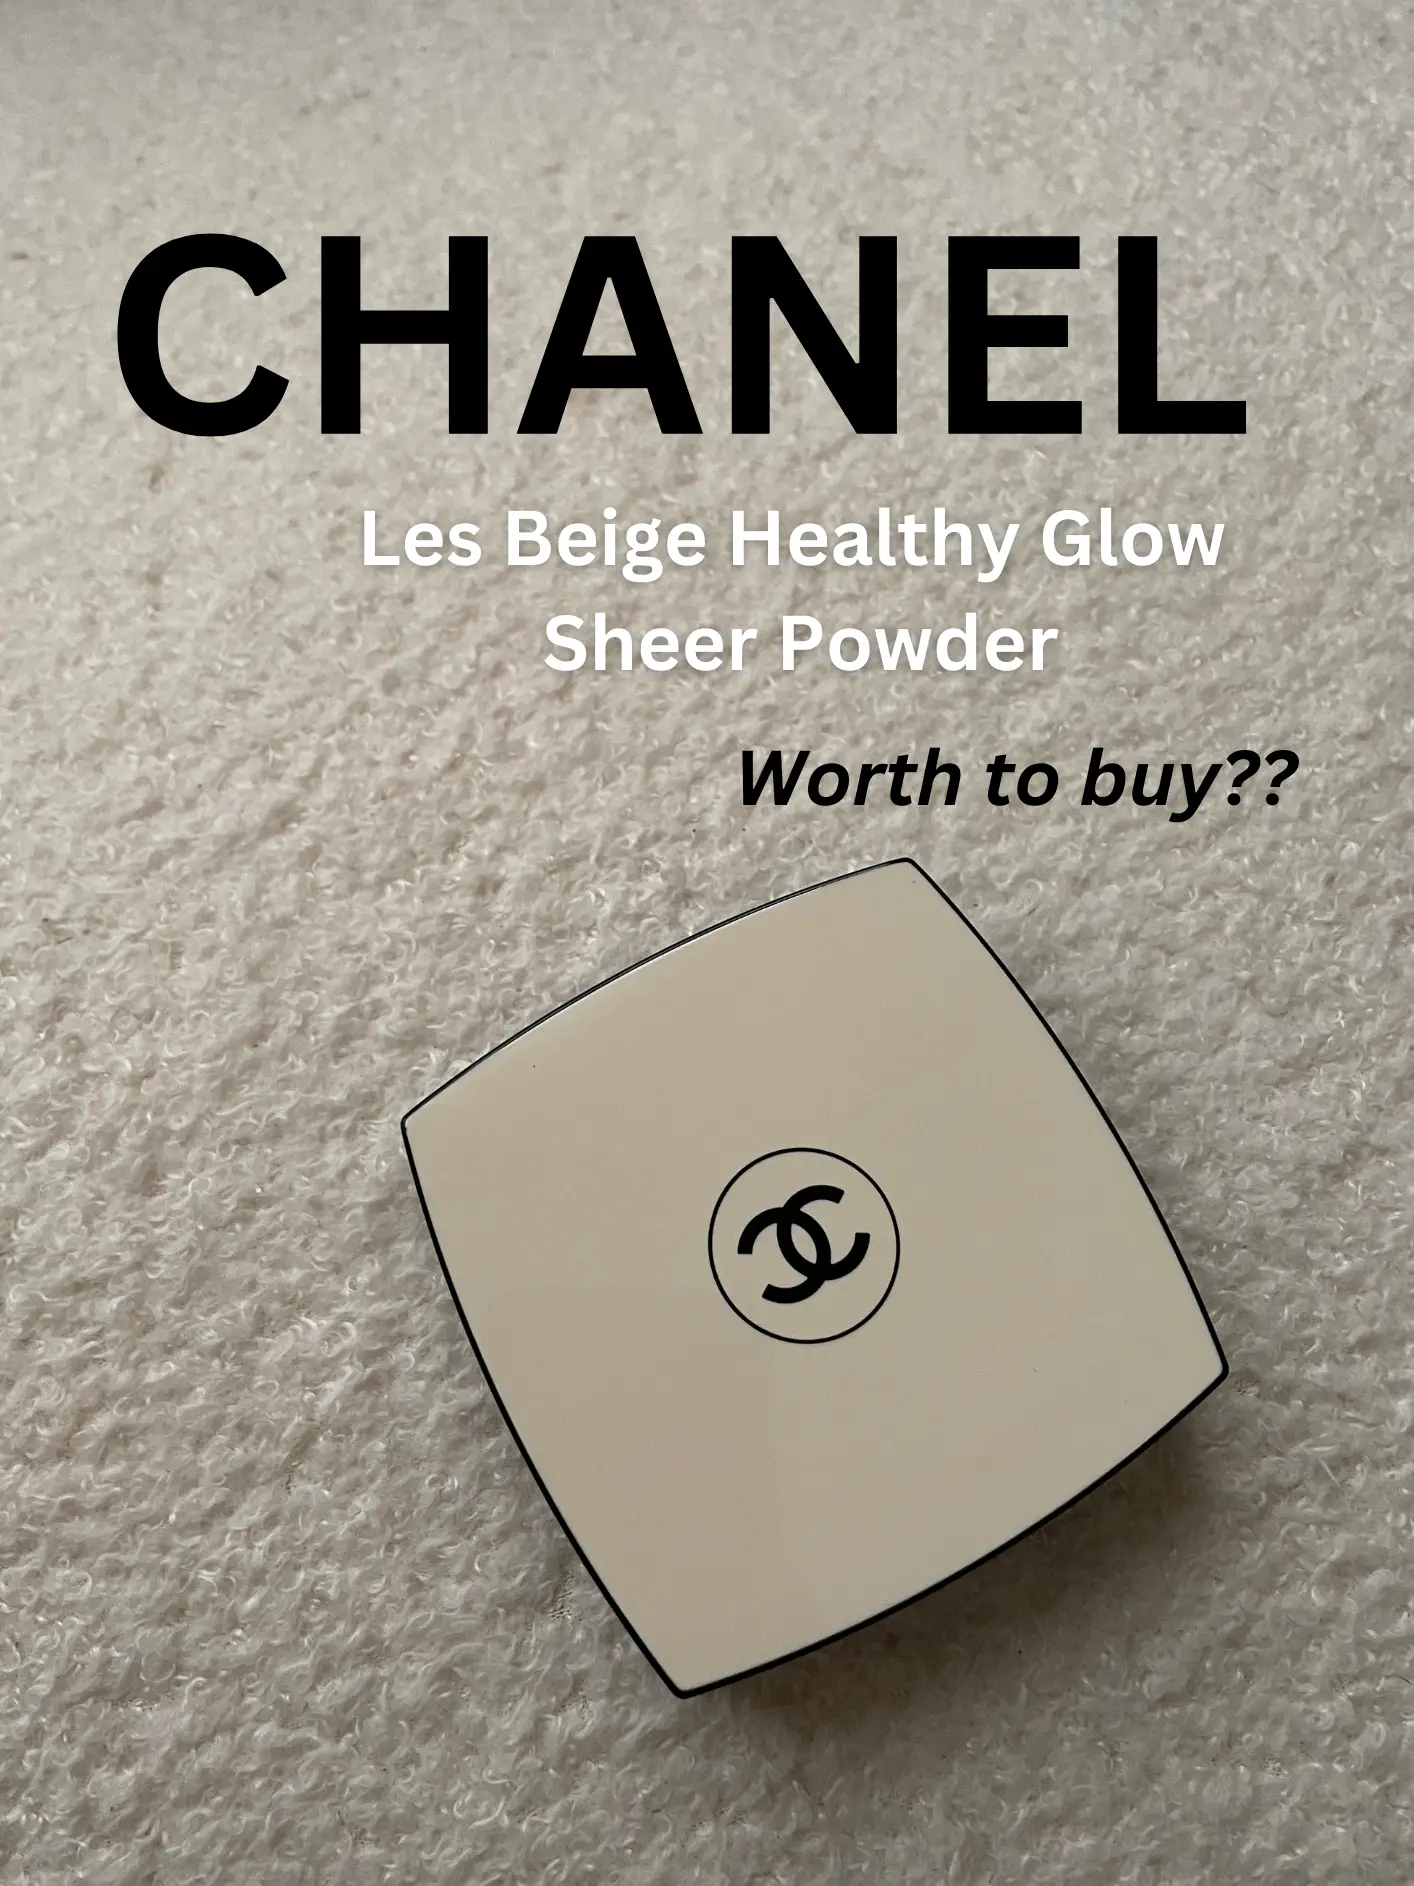 Chanel Sheer Powder - worth to buy or not?